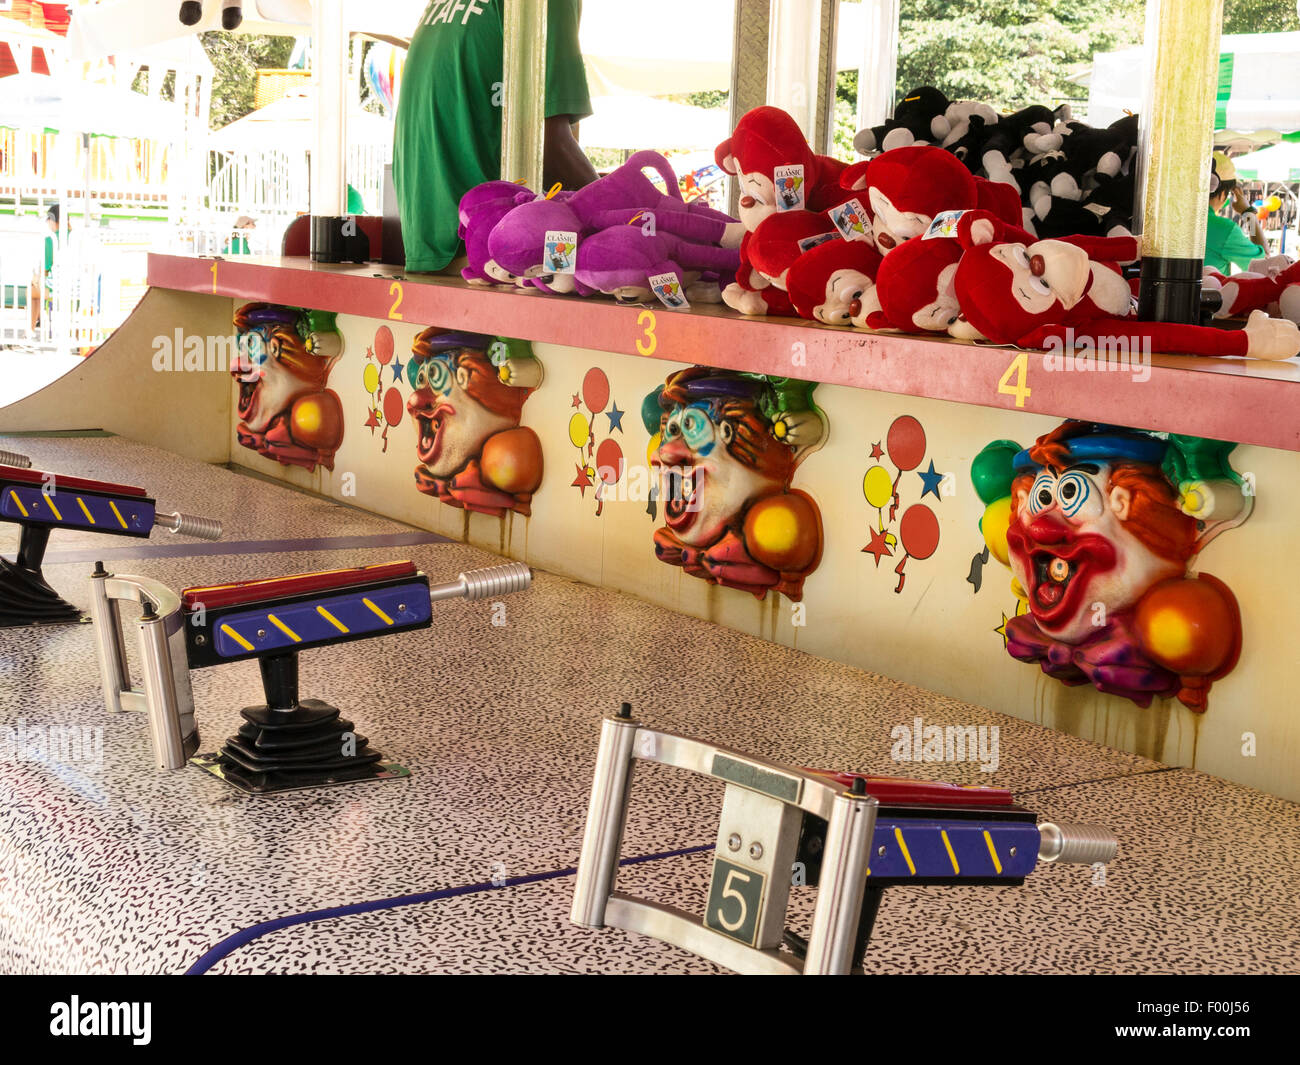 Arcade Sharpshooter Game with Clown Theme in Central Park, NYC Stock Photo